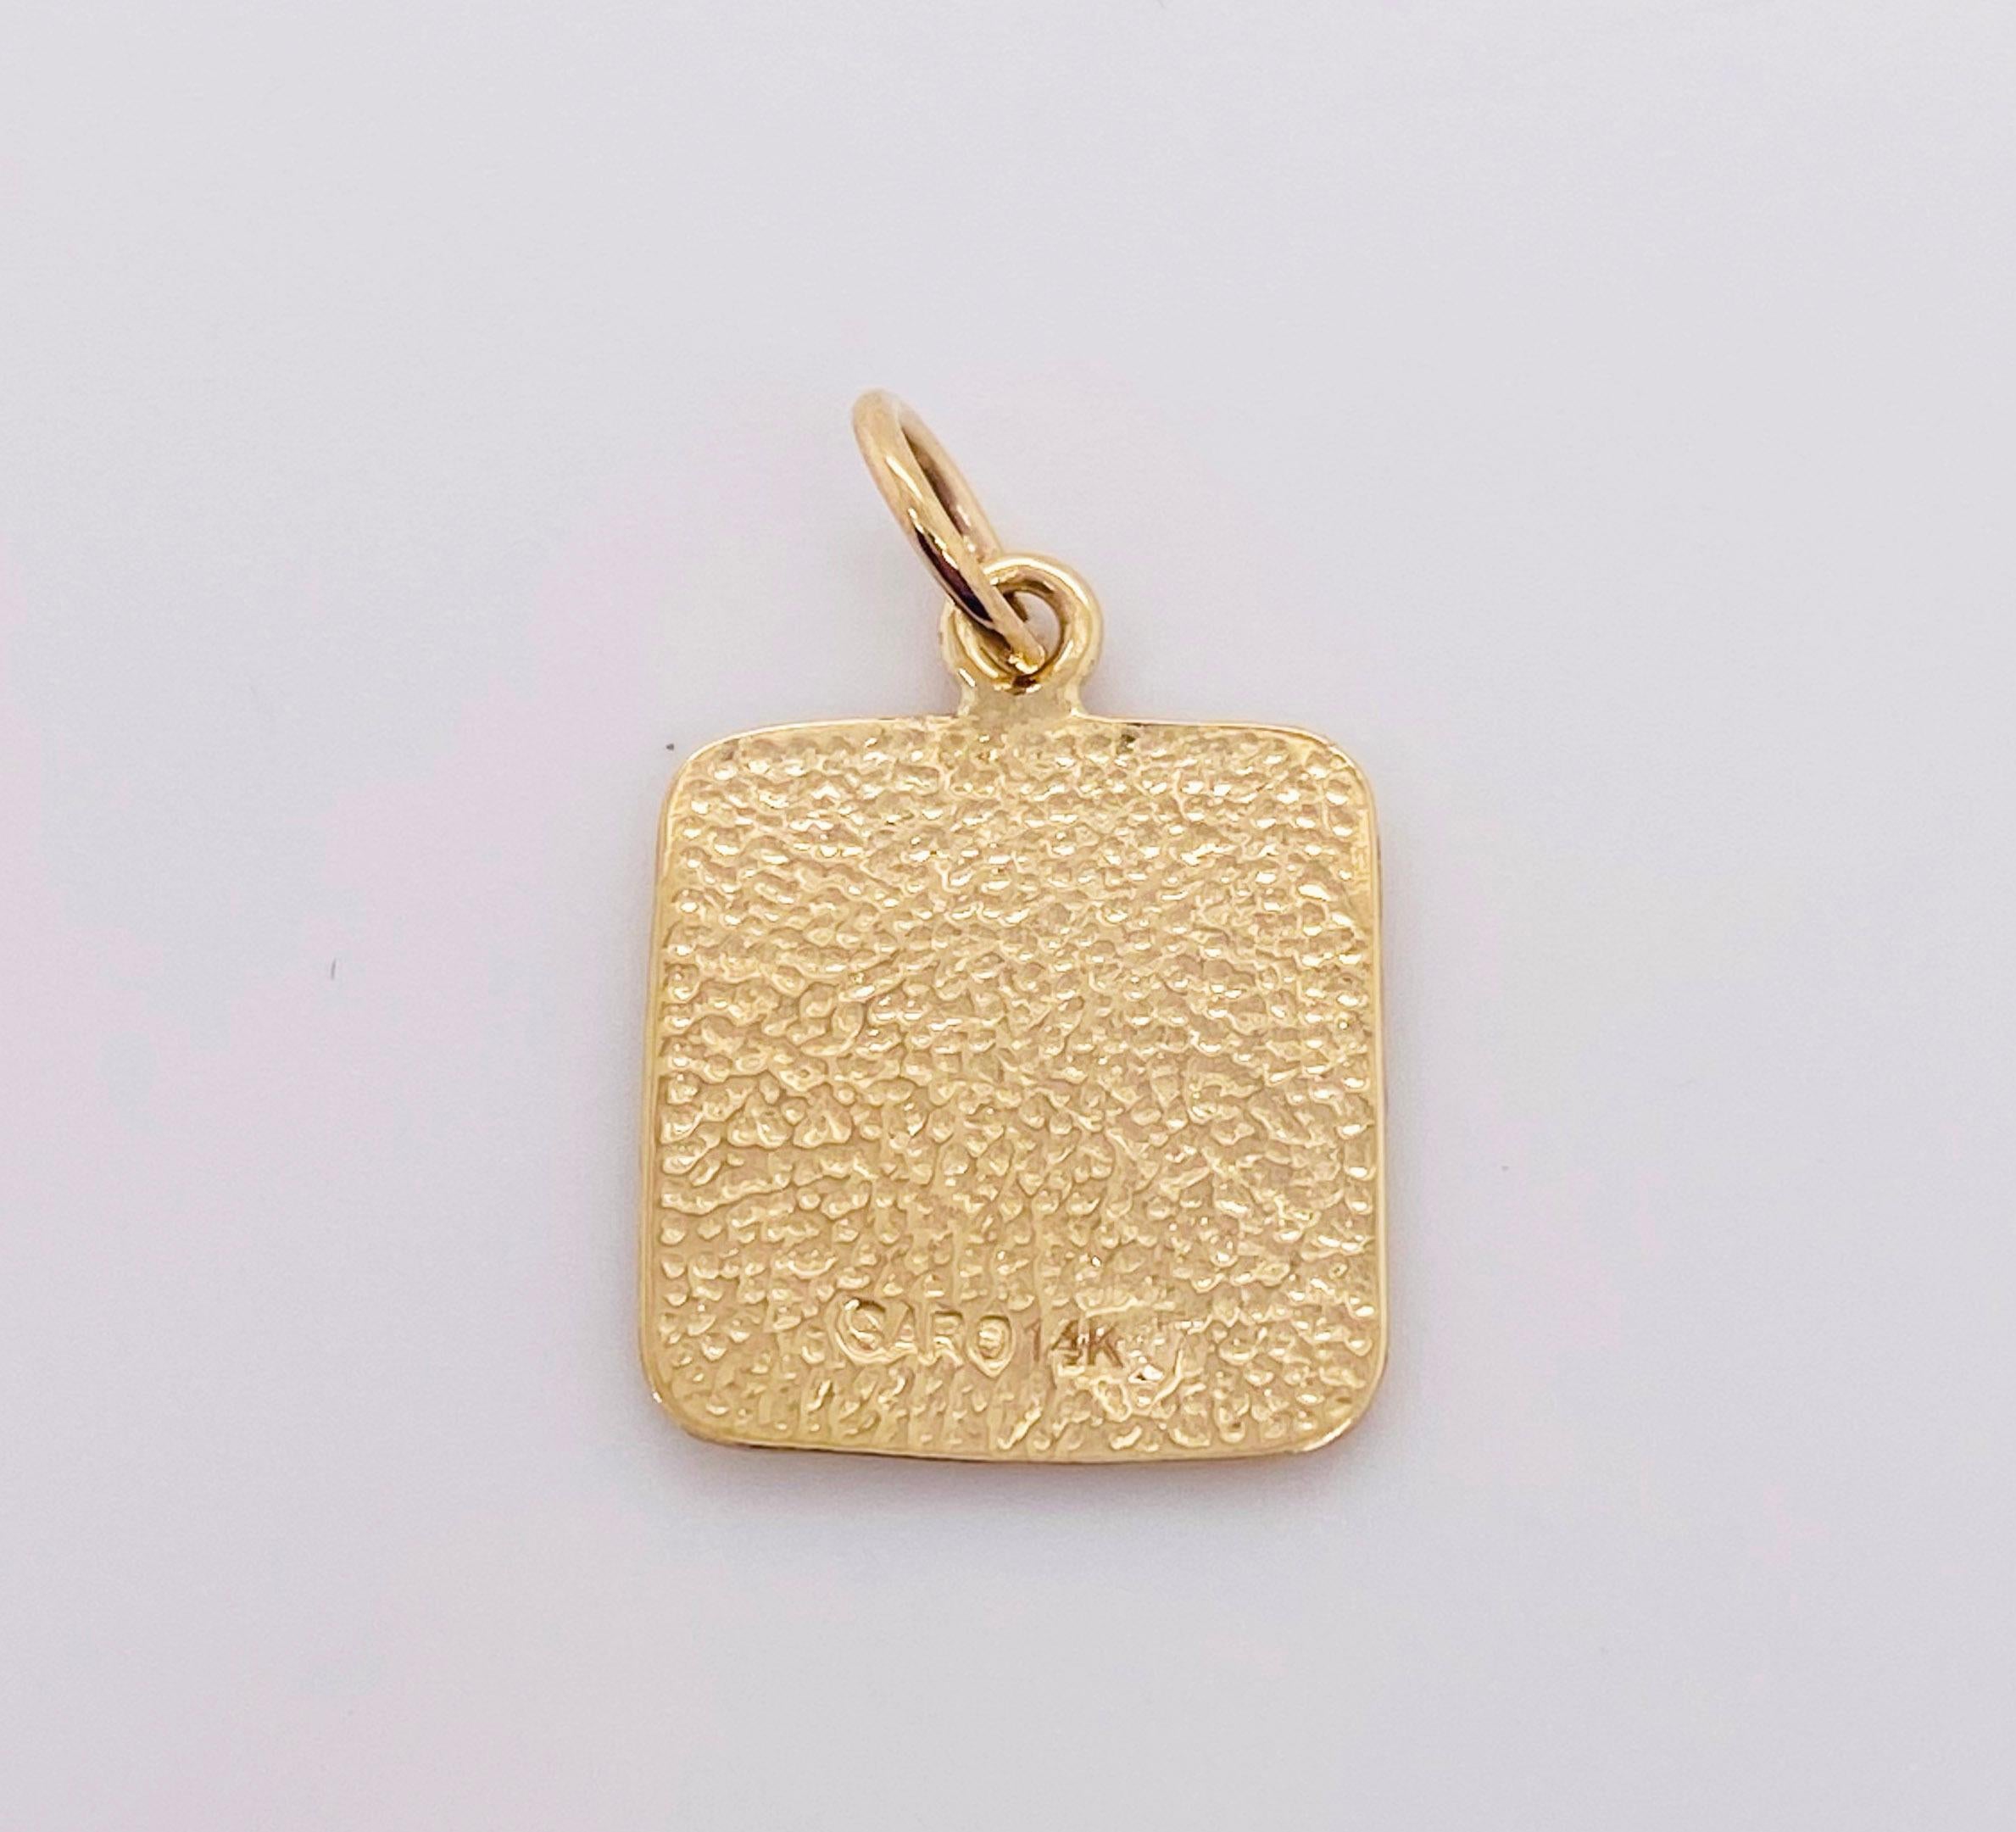 Metal Quality: 14 Kt Yellow Gold 
Charm Shape: Square 
Measurements: 1.5 cm X 1.5 cm 
Total Gram Weight: 1.5 g 